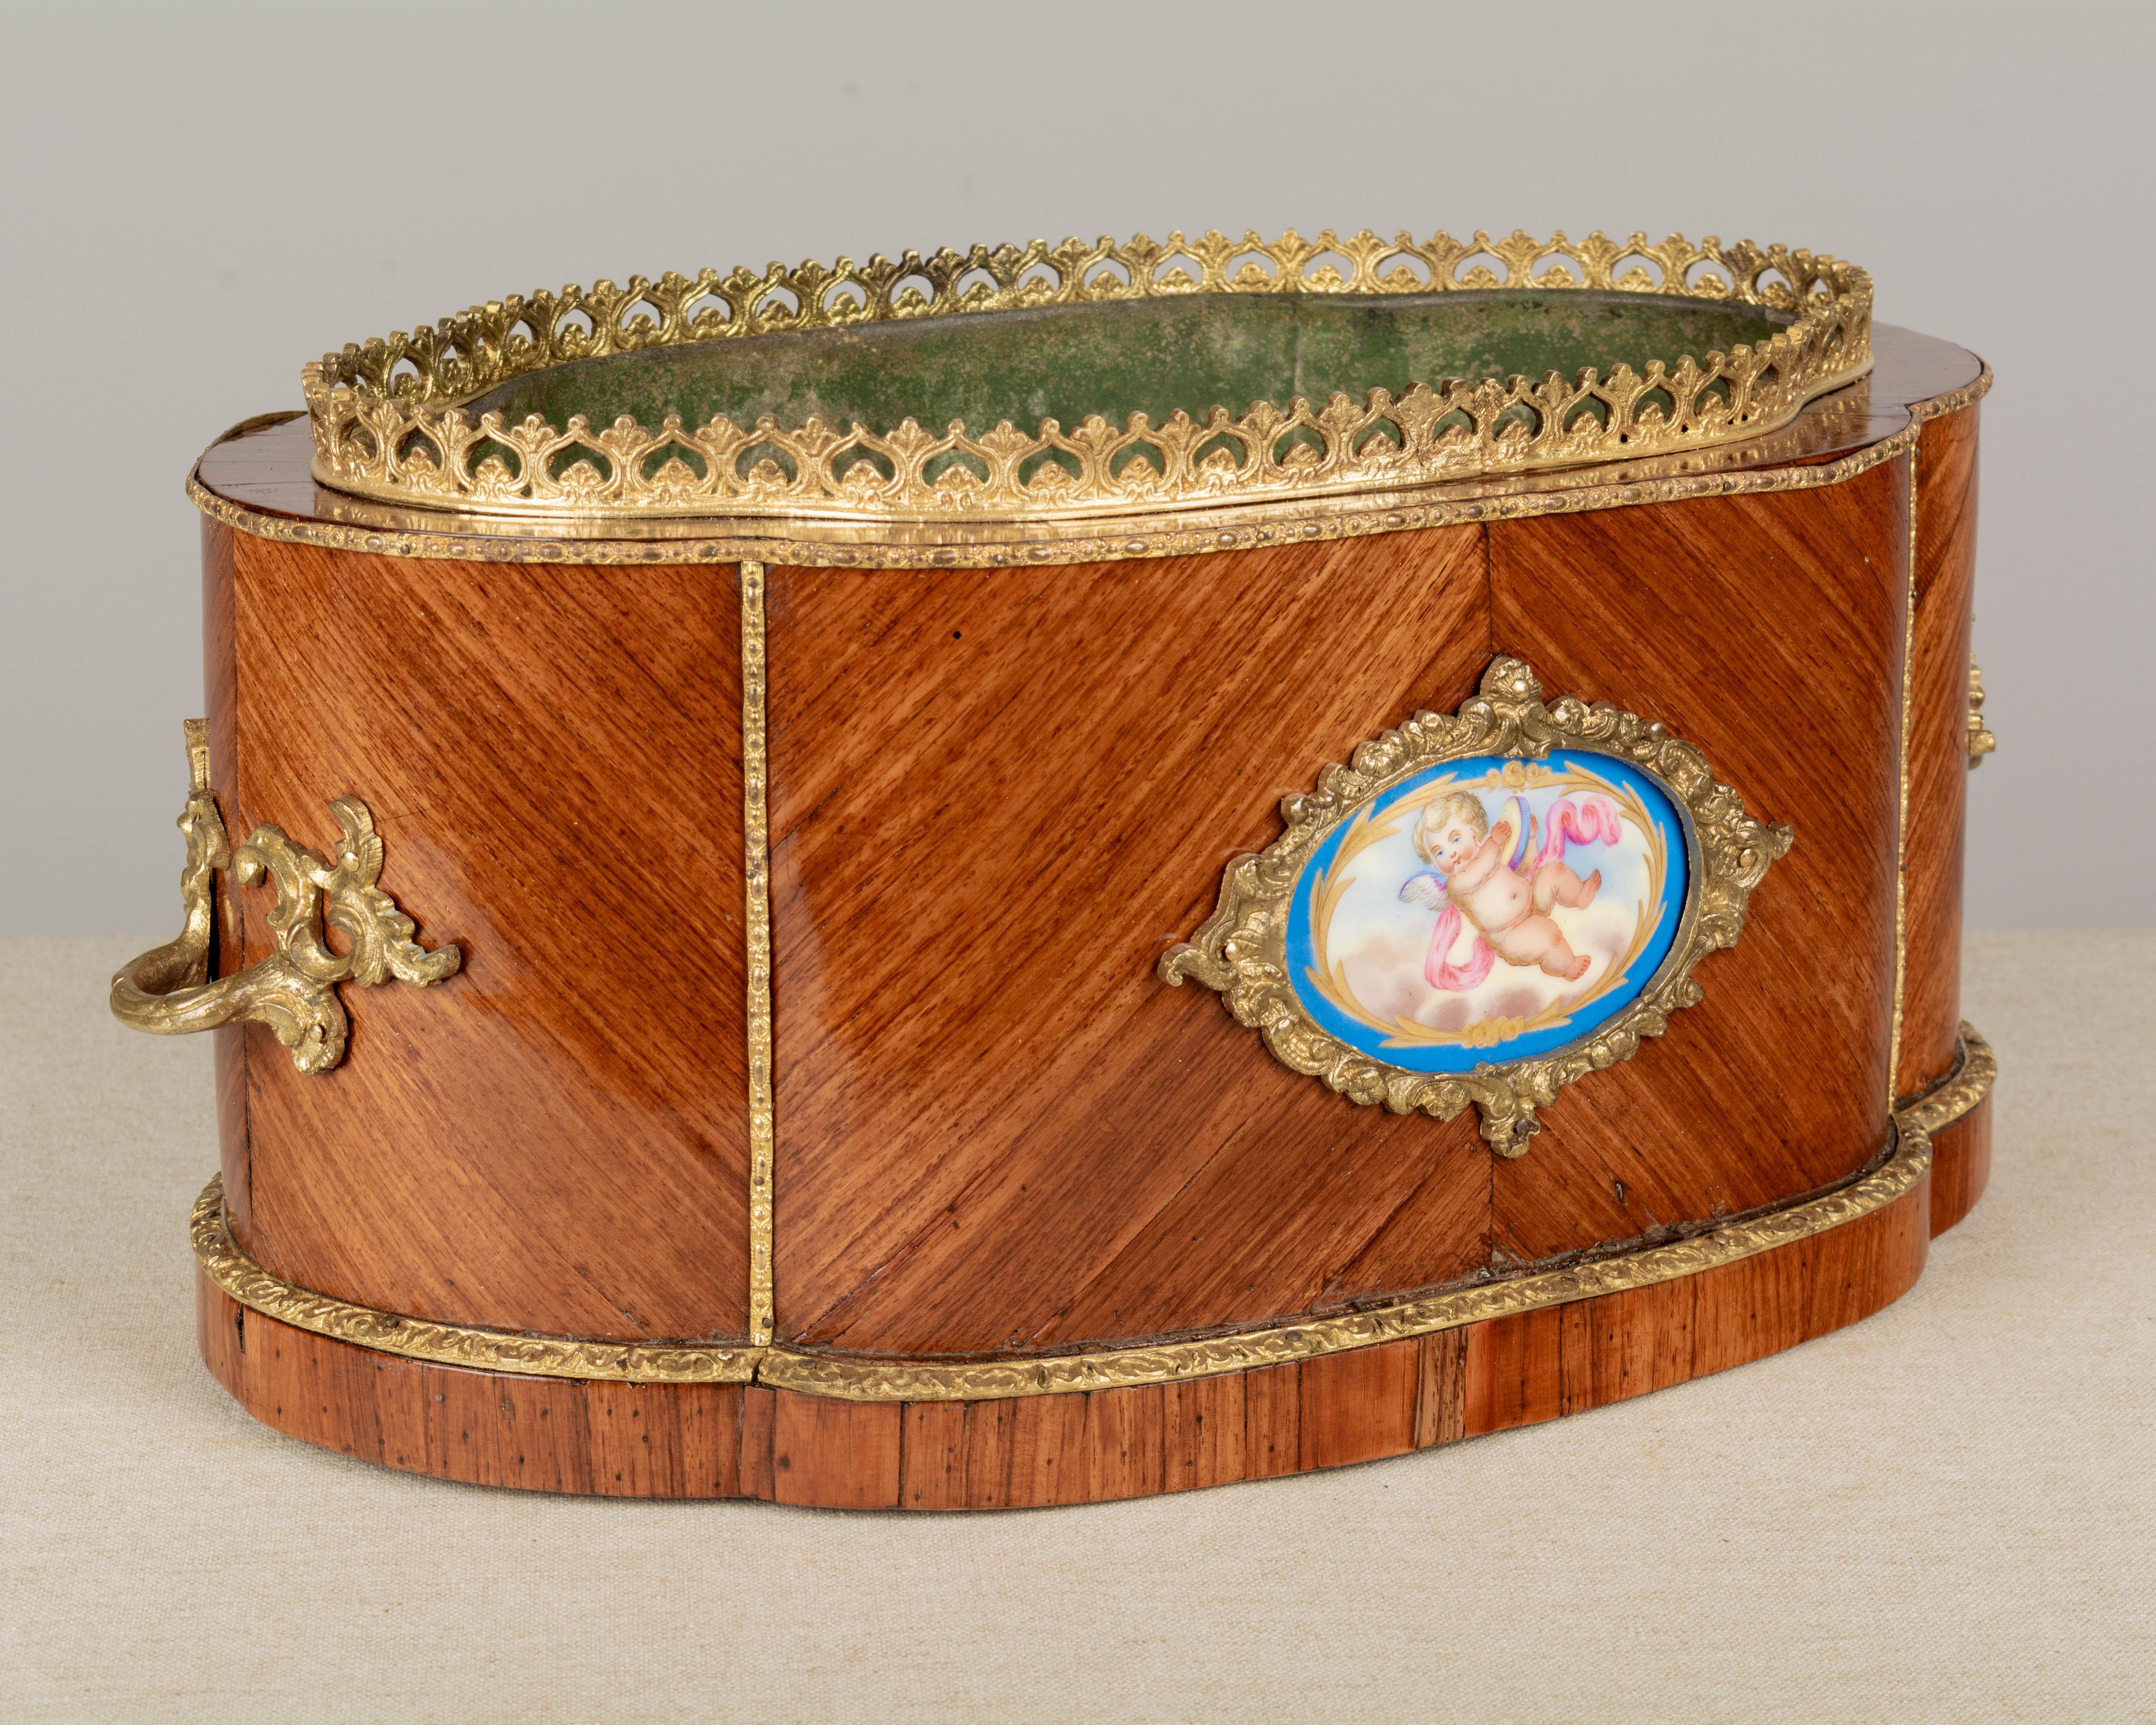 A 19th century Napoleon III bronze mounted marquetry jardiniere, or planter, with inlaid veneer of kingwood. Decorated with two hand-painted Se`vres porcelain medallions, one with a cupid and the other with flowers. Original removable zinc liner has